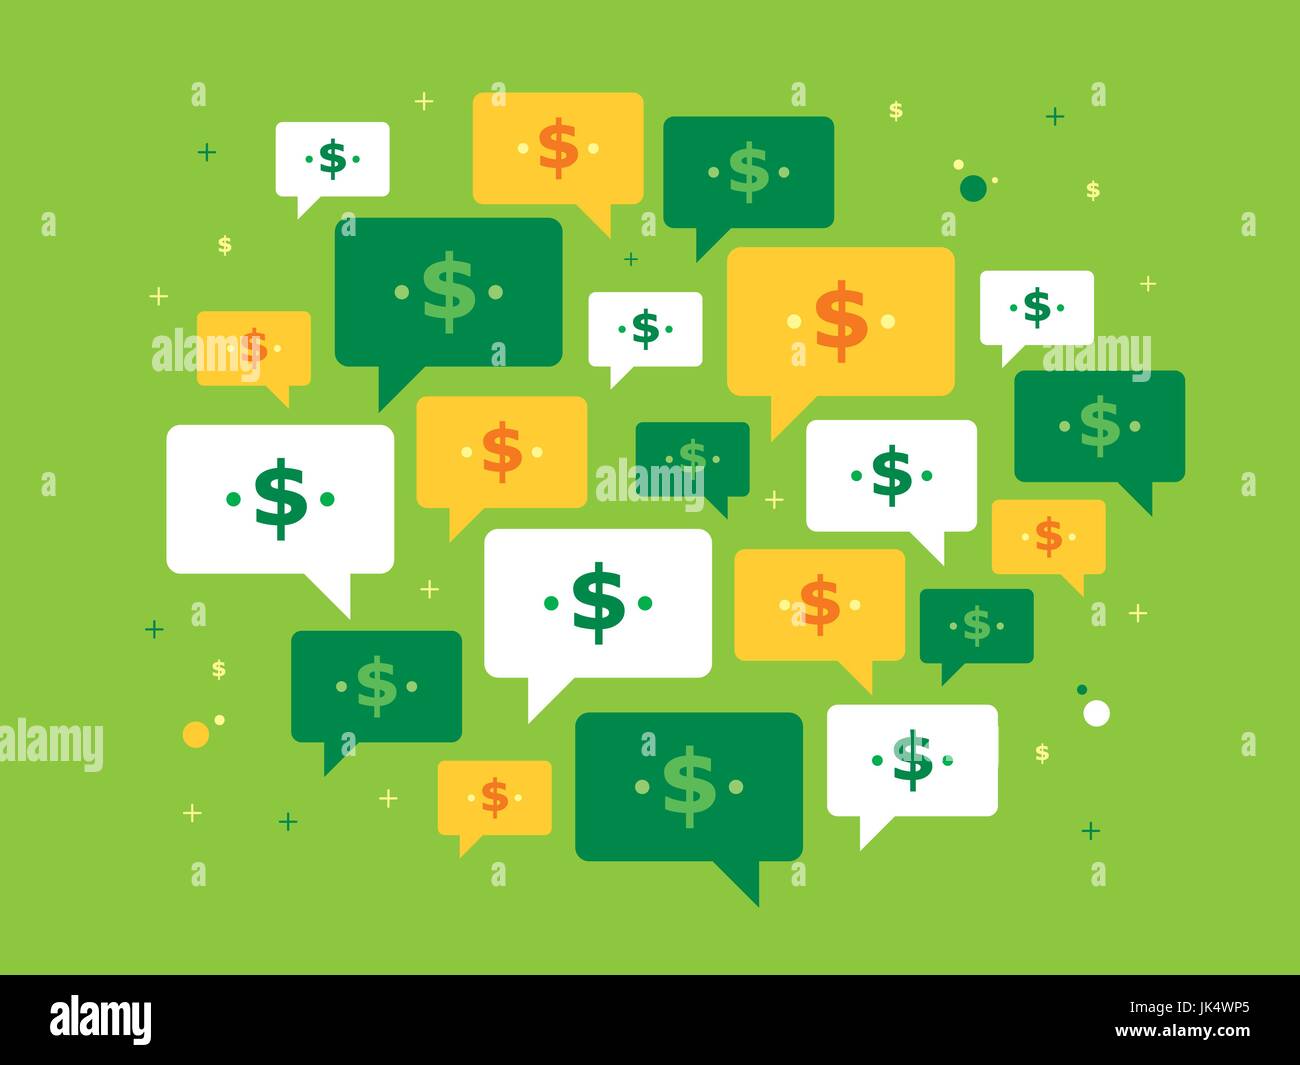 Set of speech bubbles and currency symbol on green background in vector illustration. Concept of investing, success, business, communication, rate, tr Stock Vector